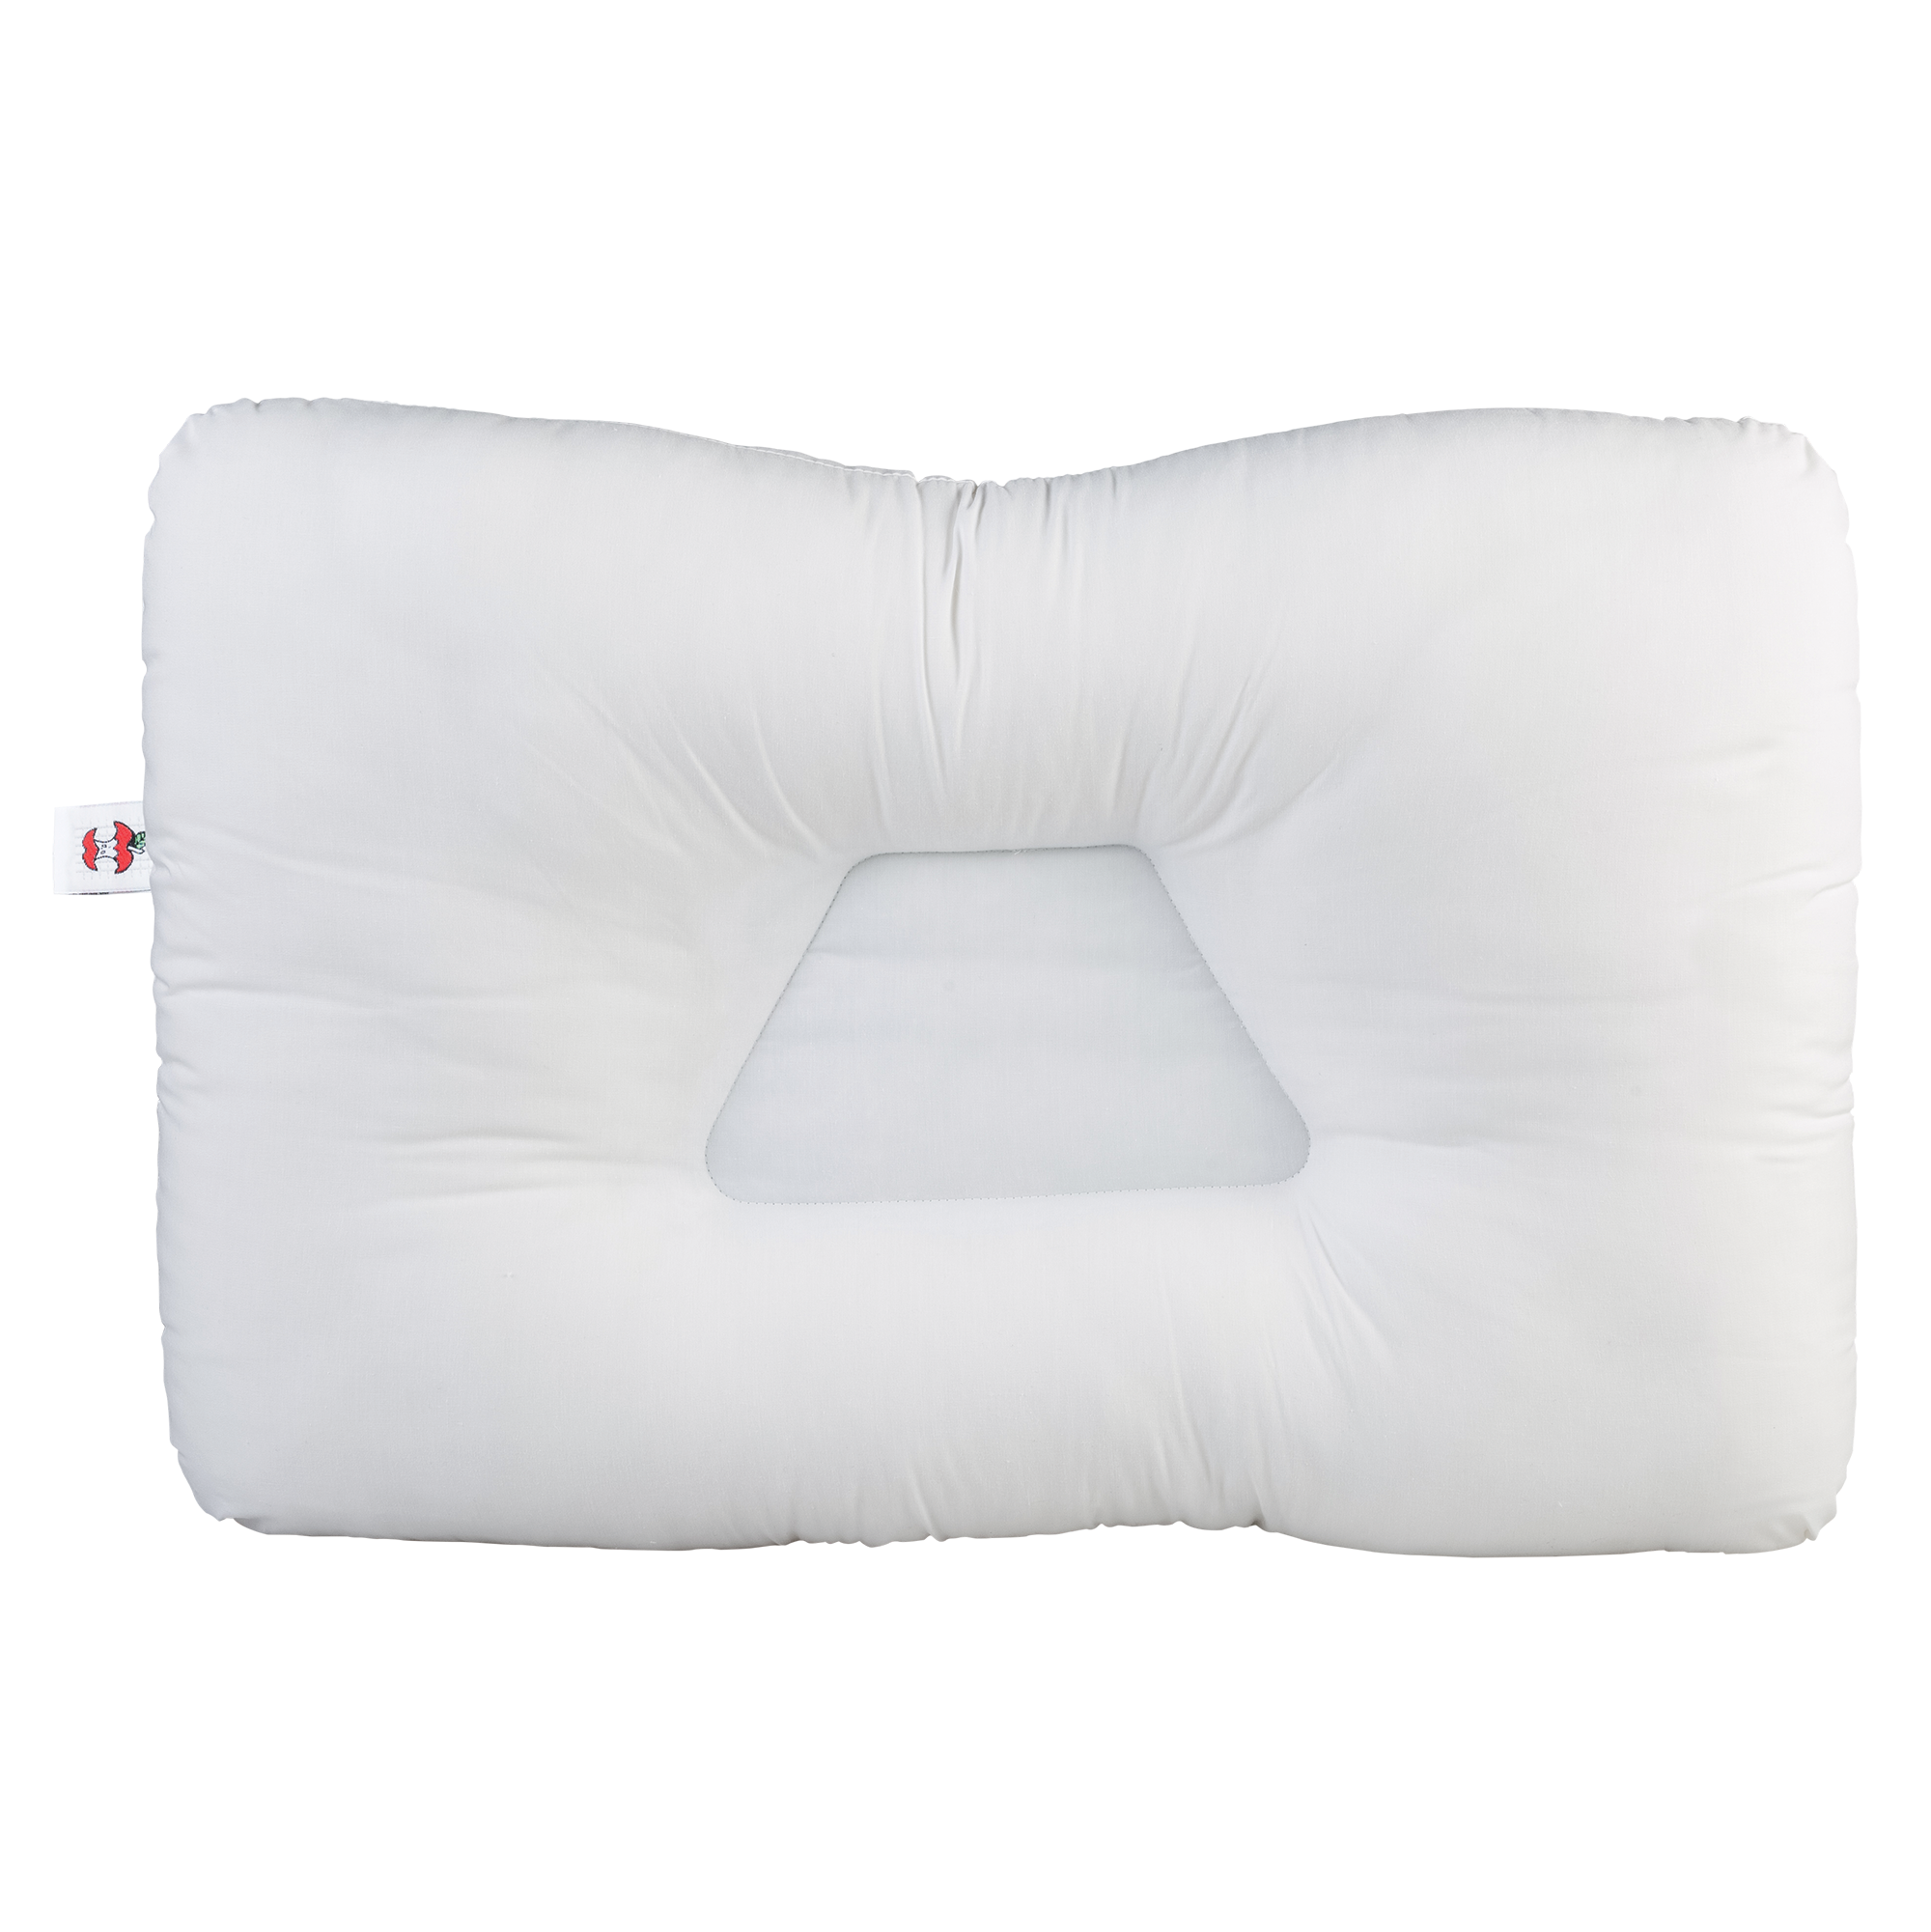 Tri-Core Natural Cervical Support Pillow with Premium Organic Cotton Shell